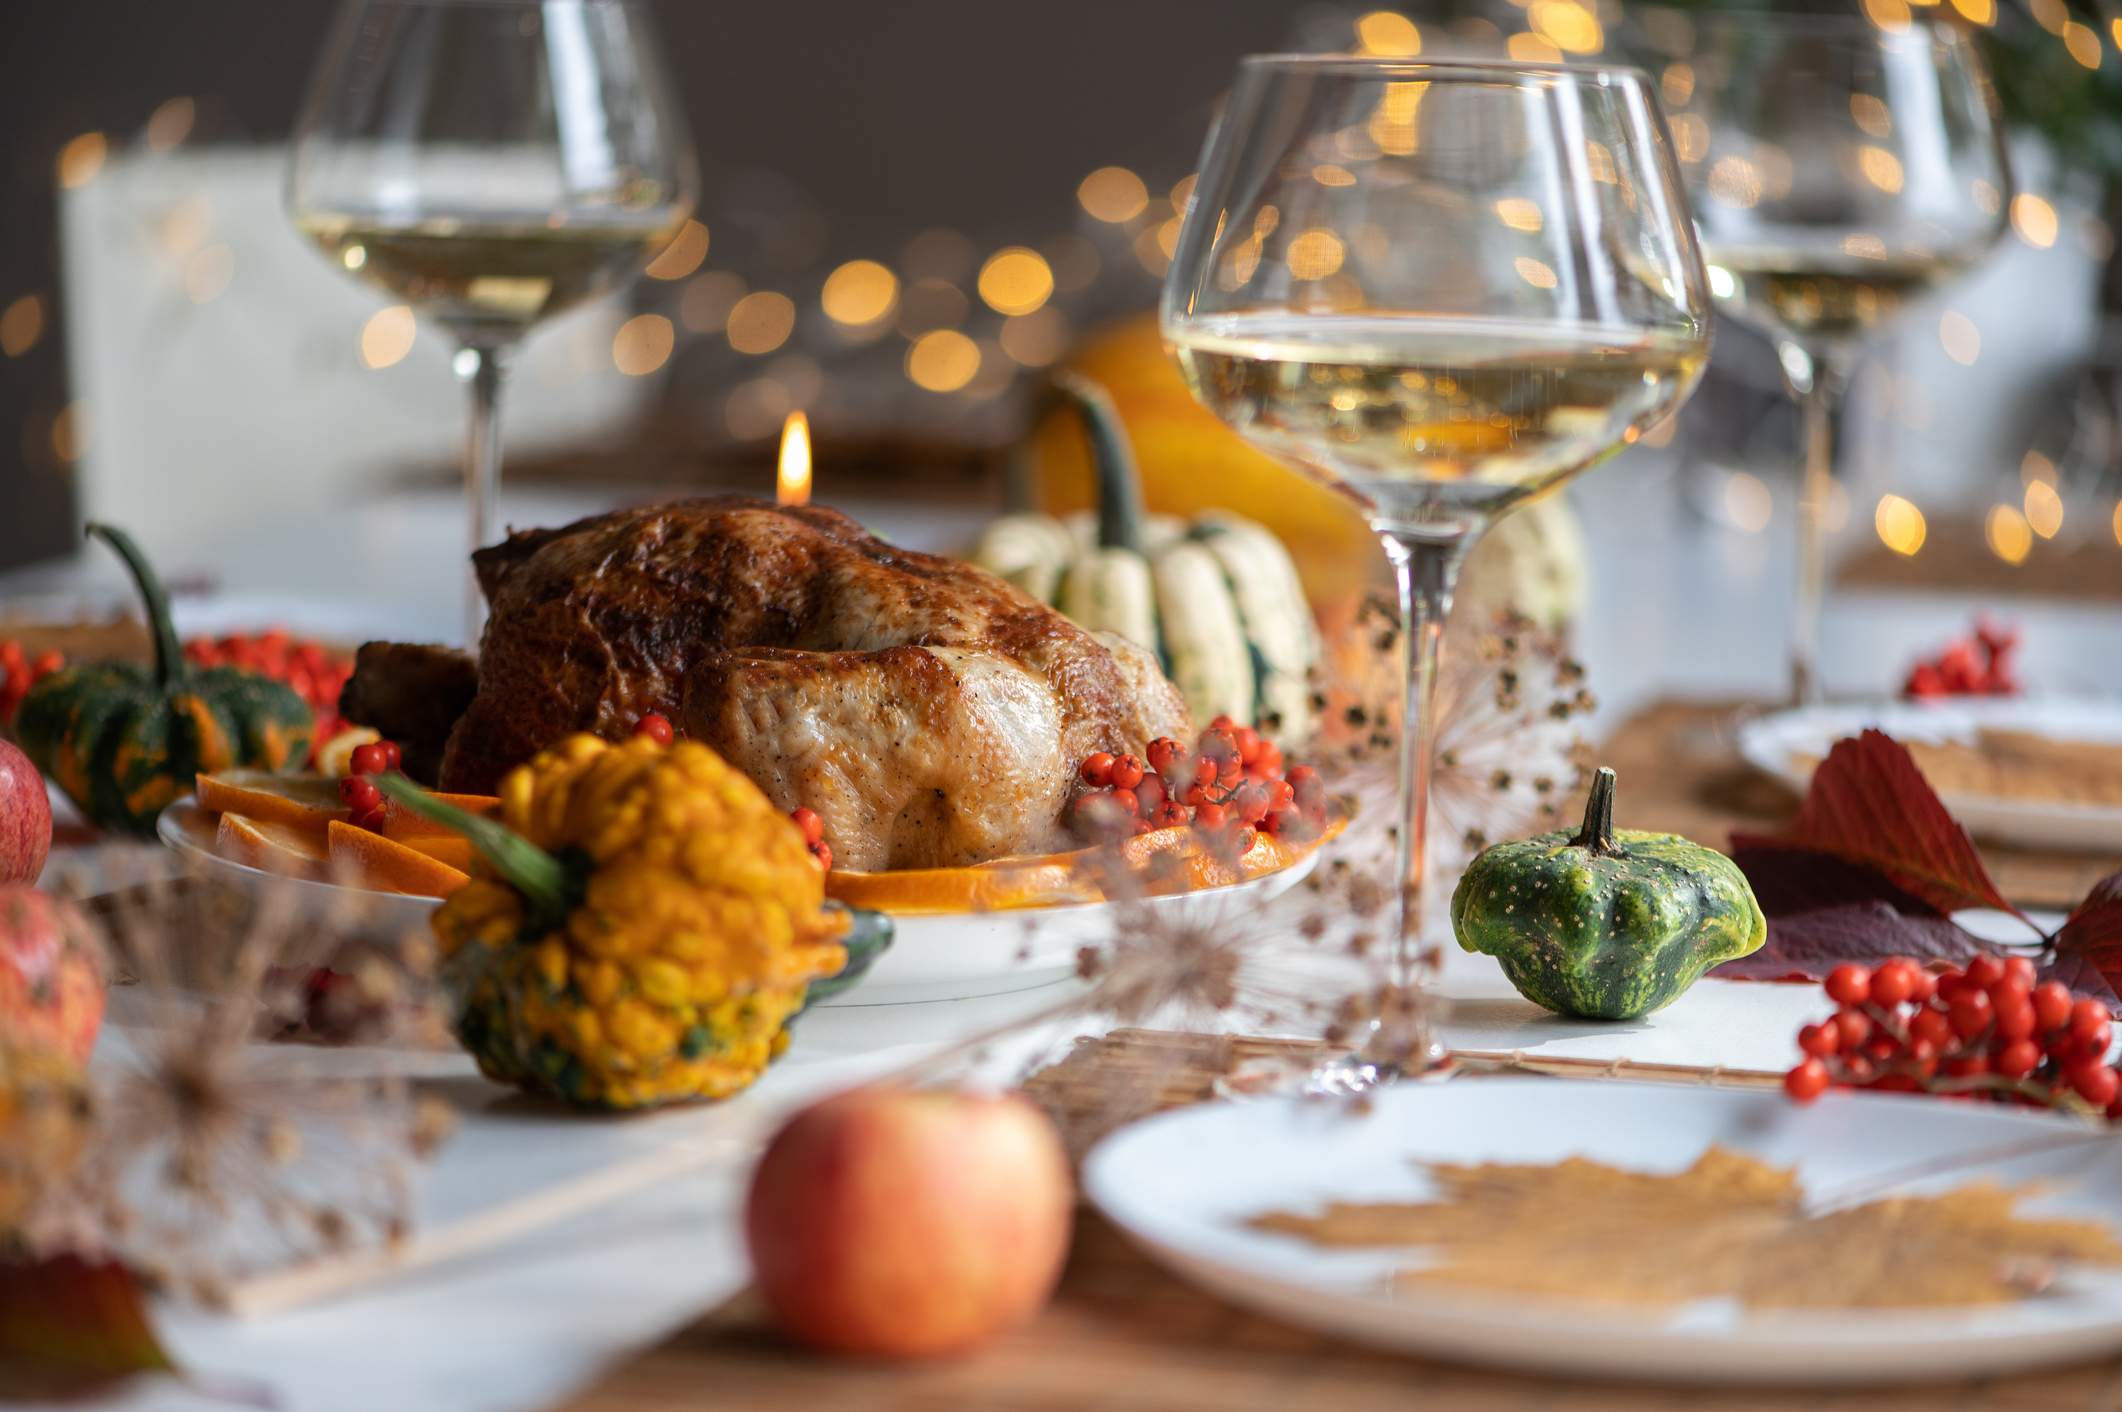 Image depicts a table set for the holidays. There is a cooked bird in the middle of the table and gords sprinkled around as decorations. There is white wine in the glasses. 